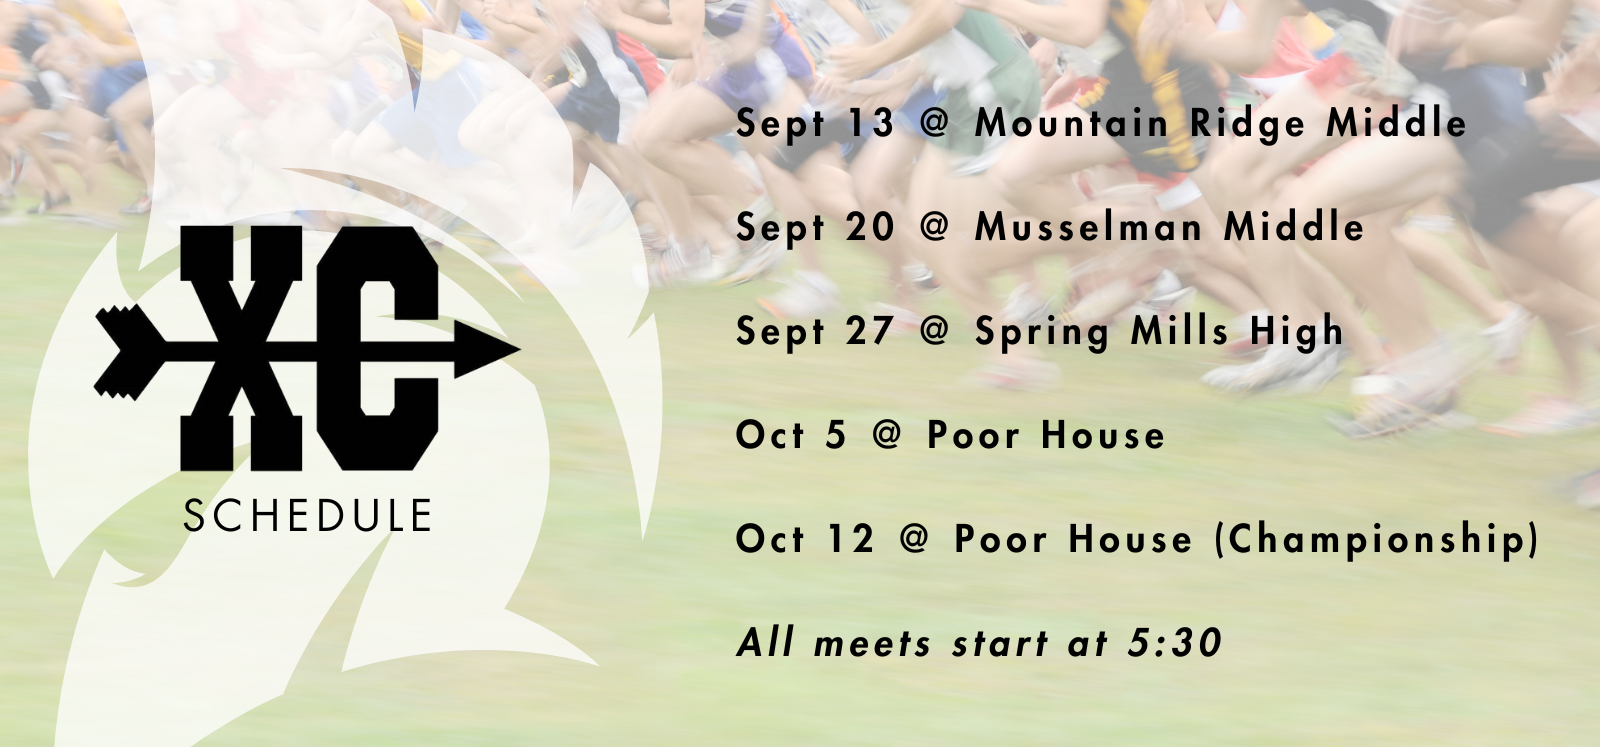 Come support our Cross Country Teams!